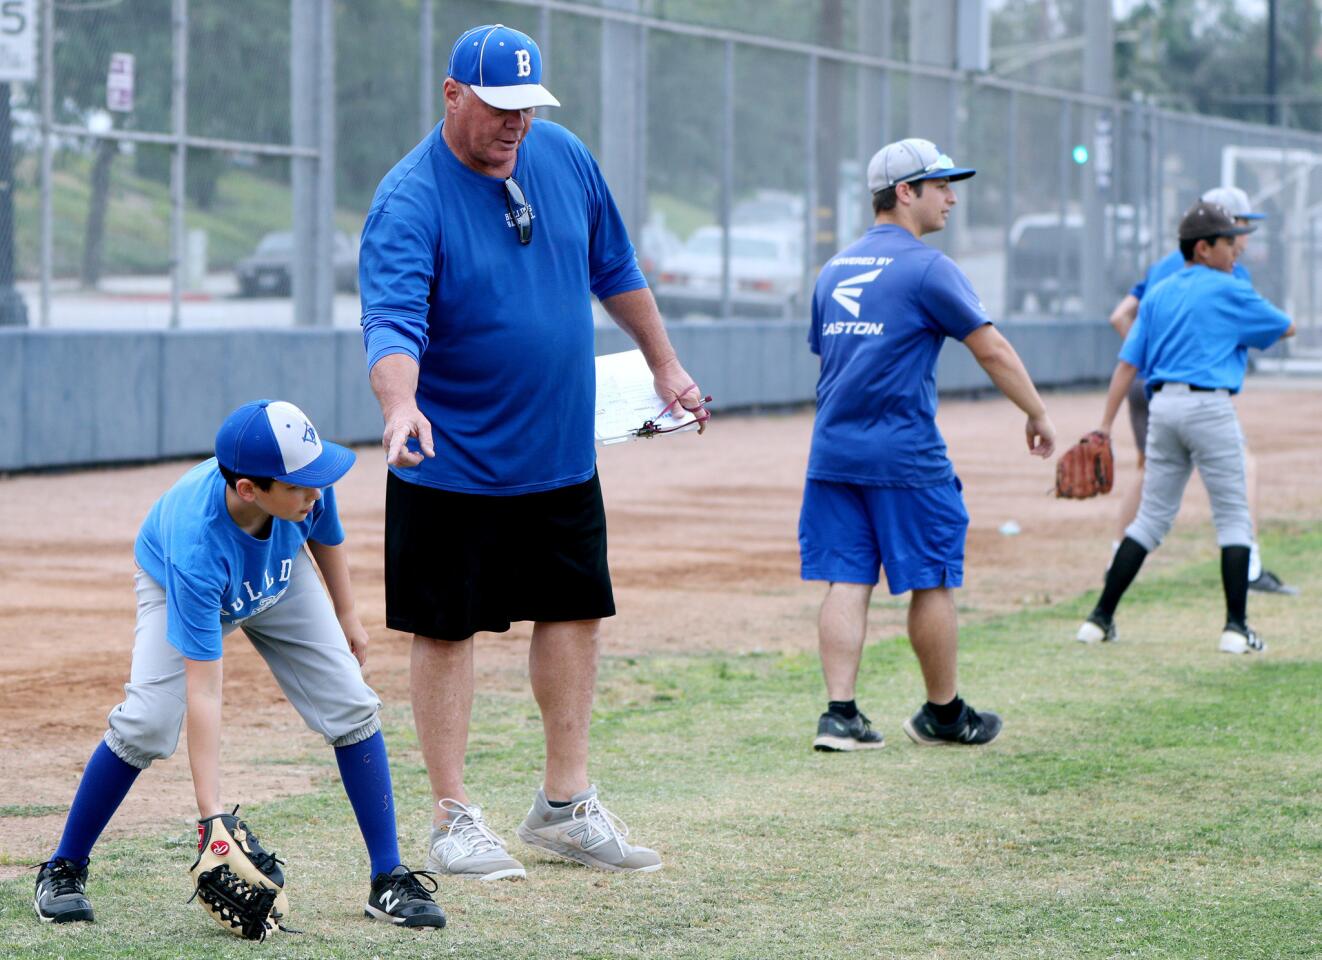 Burbank High School baseball coach Bob Hart instructs ten-year old Aidan Casey on the finer points of catching during the annual Junior Bulldogs Camp for youth 11-15, at Burbank High School on Tuesday, June 18, 2019.